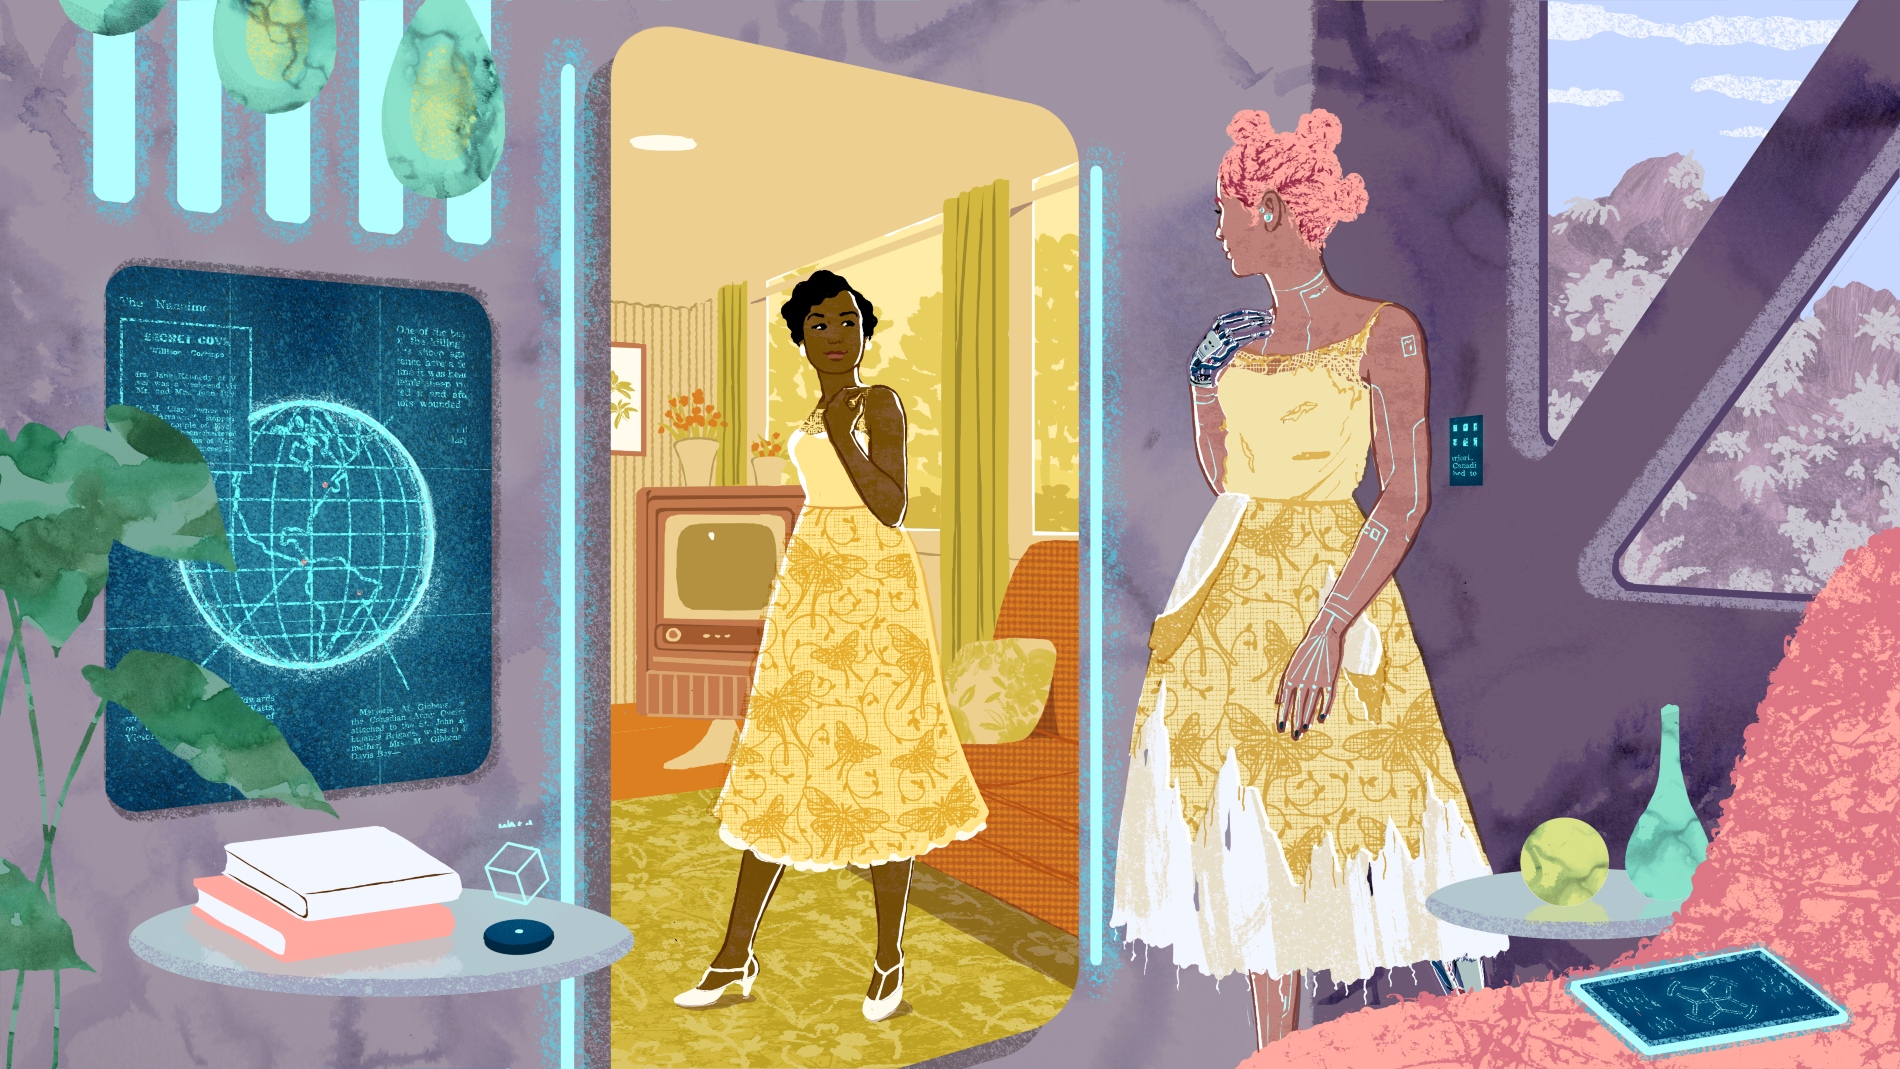 Illustration shows a woman in a futuristic room wearing a tattered yellow dress. She is looking in a mirror and the reflection shows a woman wearing a pristine yellow dress standing in a 1950s-style room.